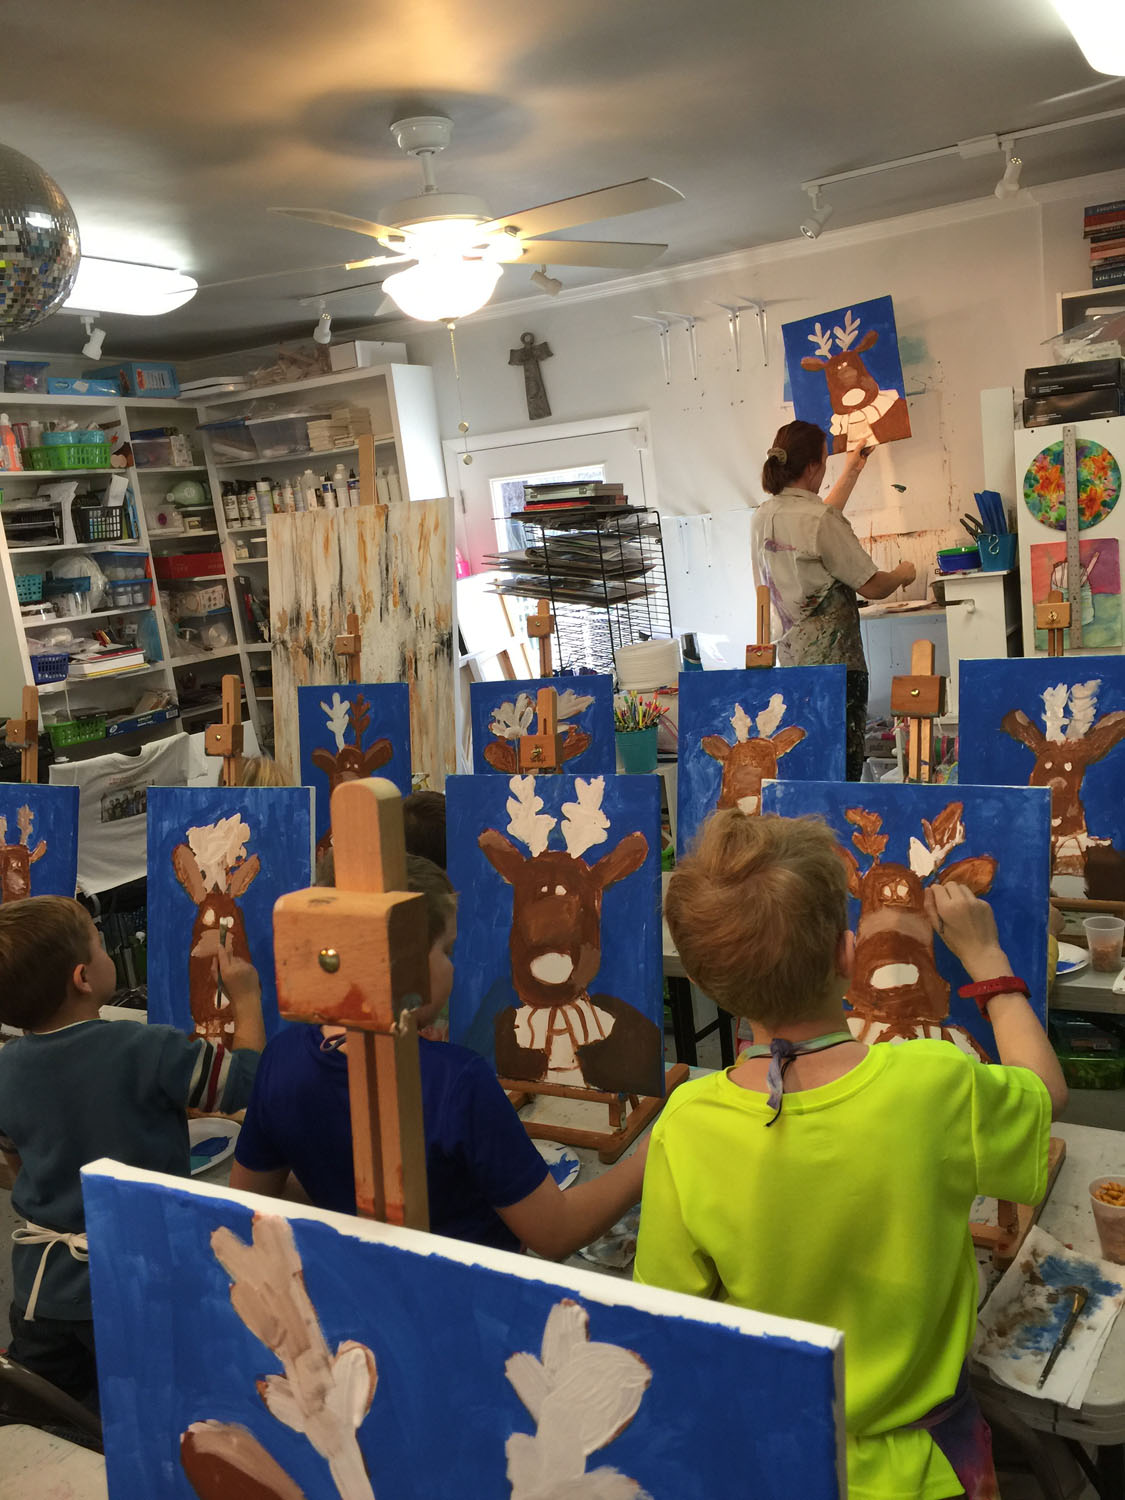 kids-art-parties-classes-and-camps-in-greensboro-nc-with-artist-tracey-j-marshallIMG_8060.jpg